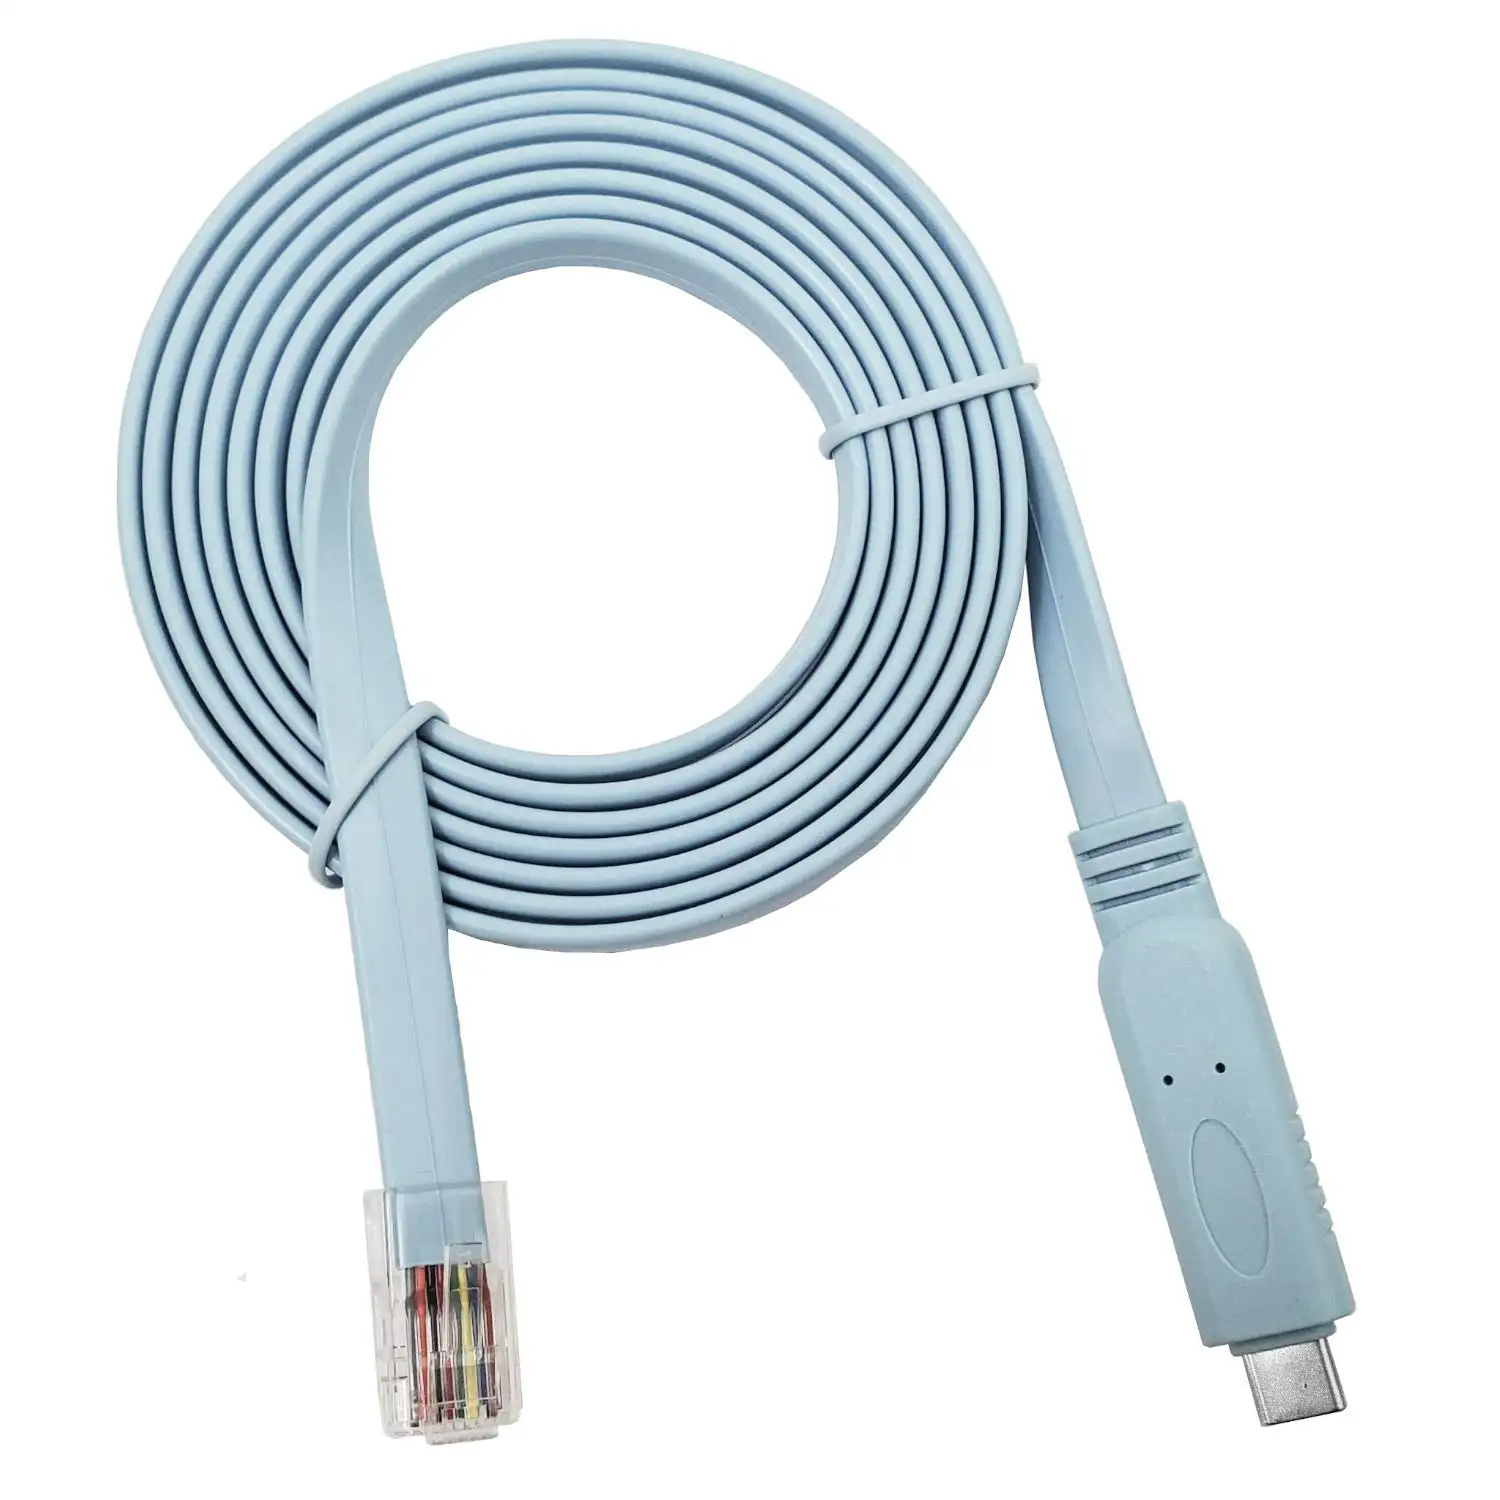 USB Console Cable USB to RJ45 Cable Essential Accesory of NETGEAR, Ubiquity, LINKSYS, TP-Link Mac, Linux